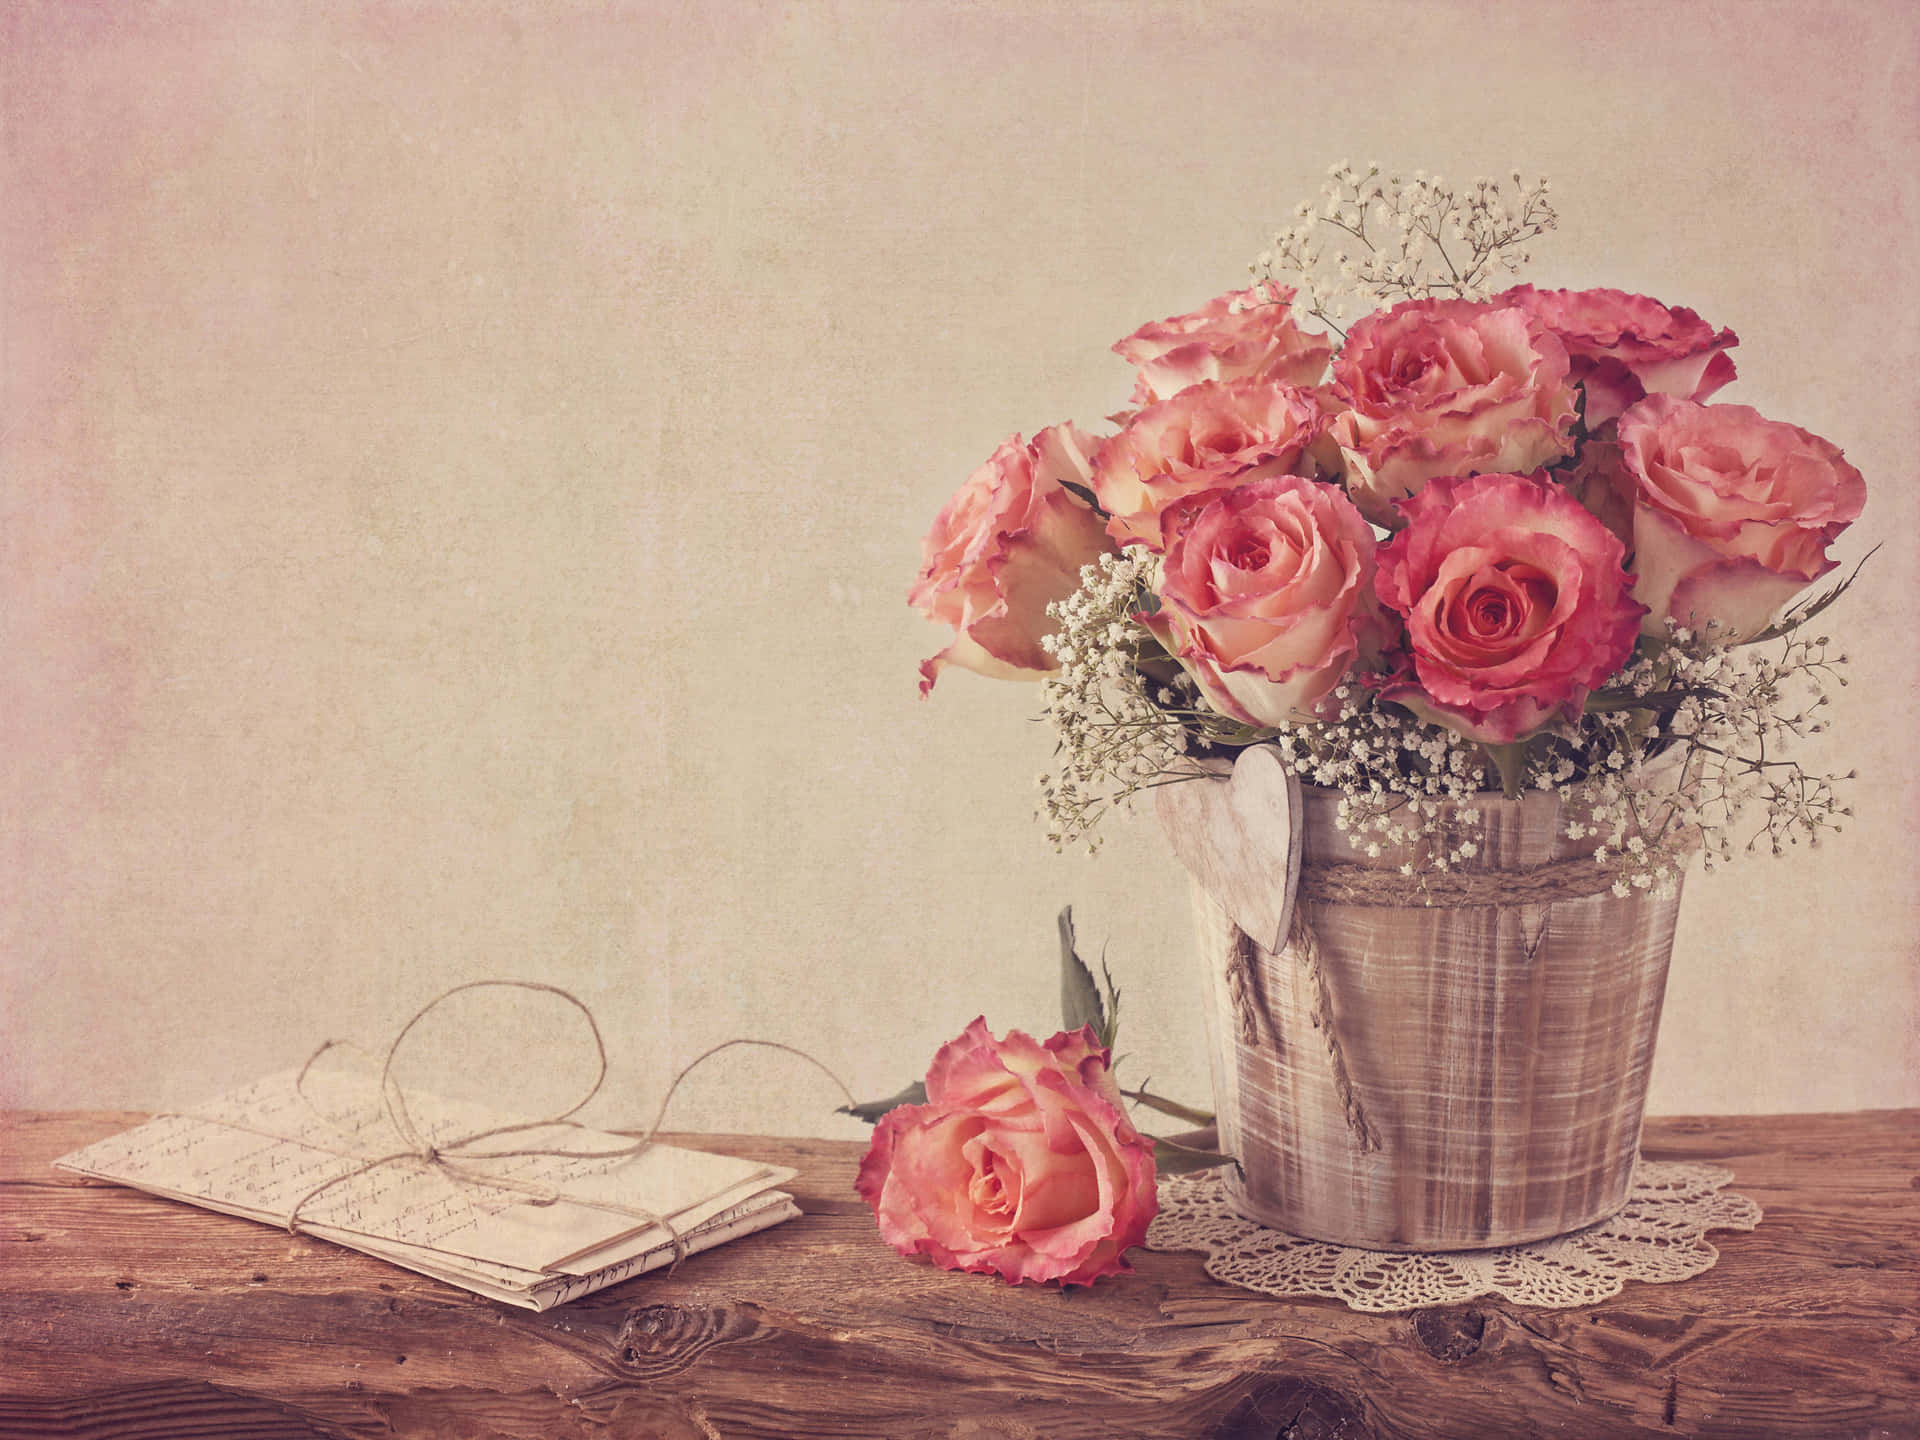 Vintage Roses In A Vase On A Wooden Table Background